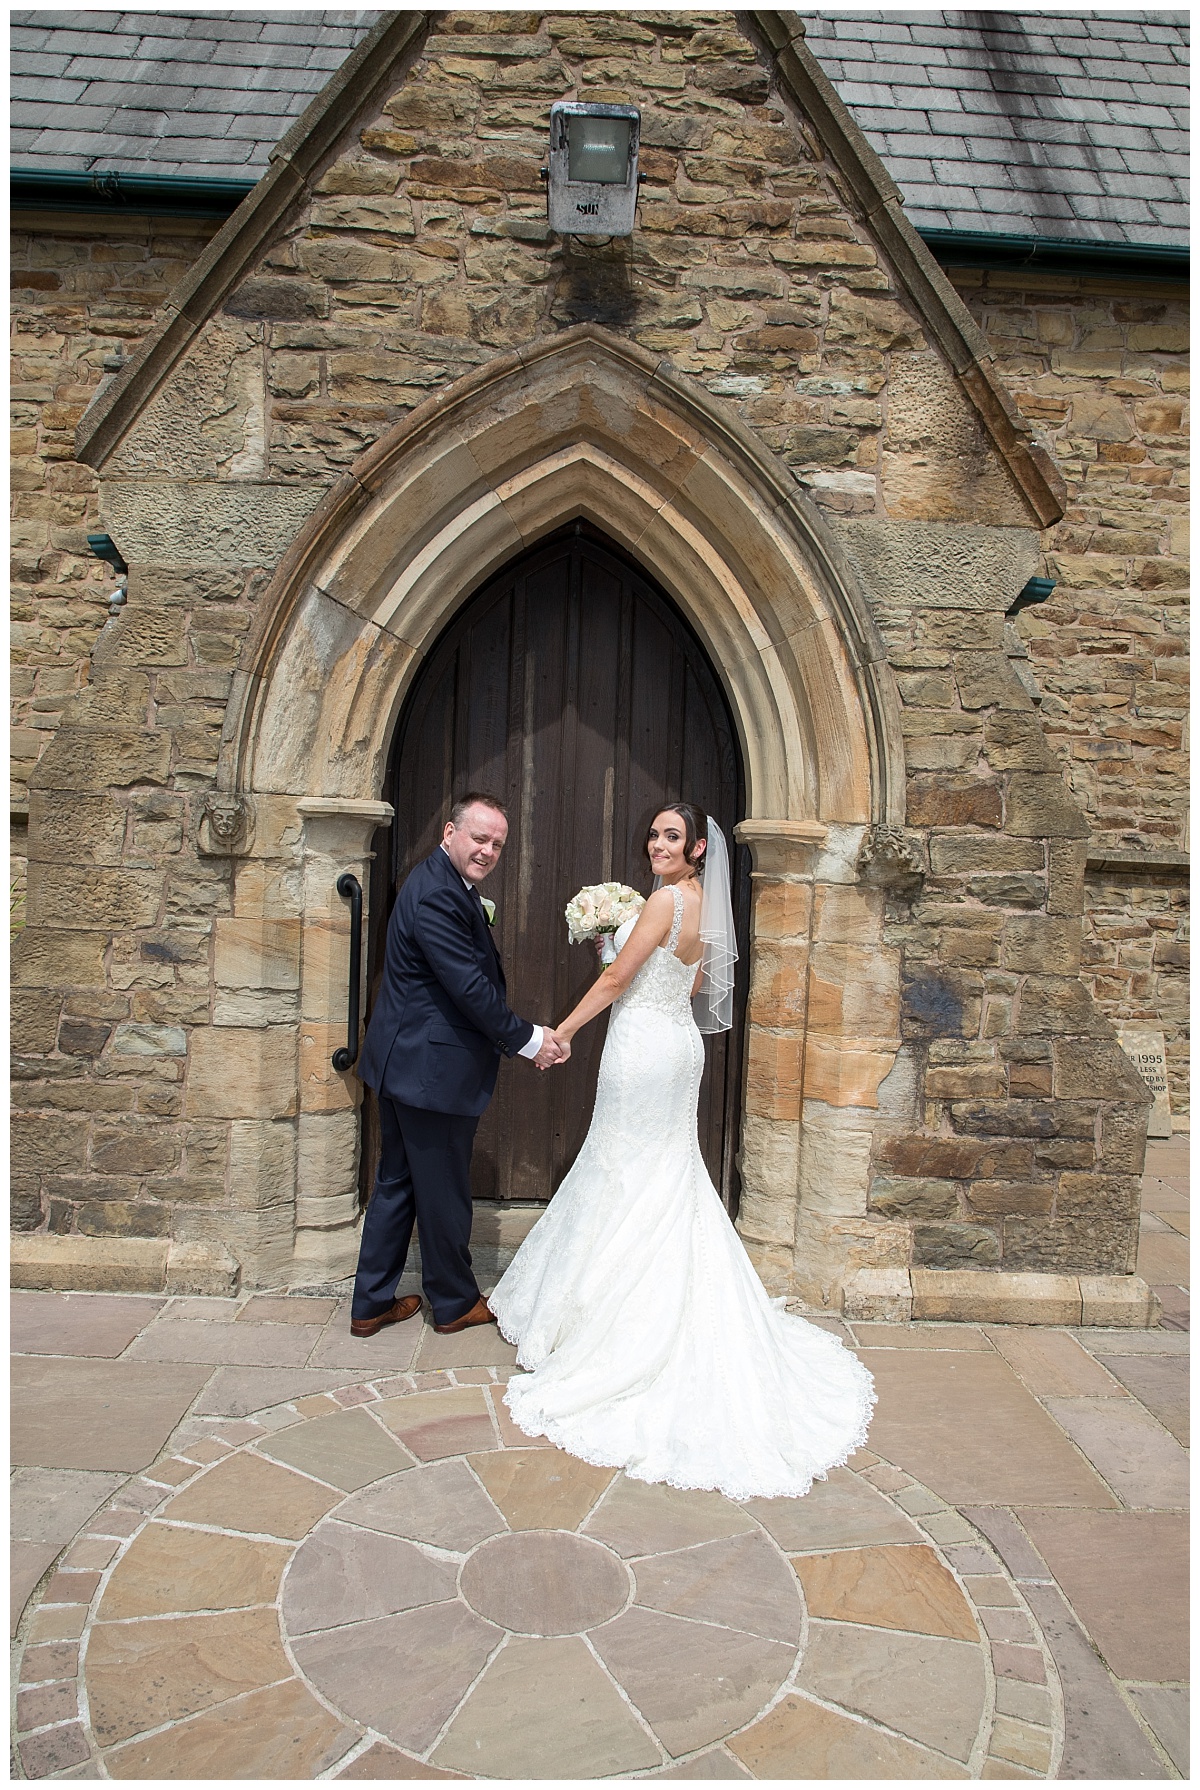 Wedding Photography Manchester - Victoria and Phillips Shireburn Arms wedding 26